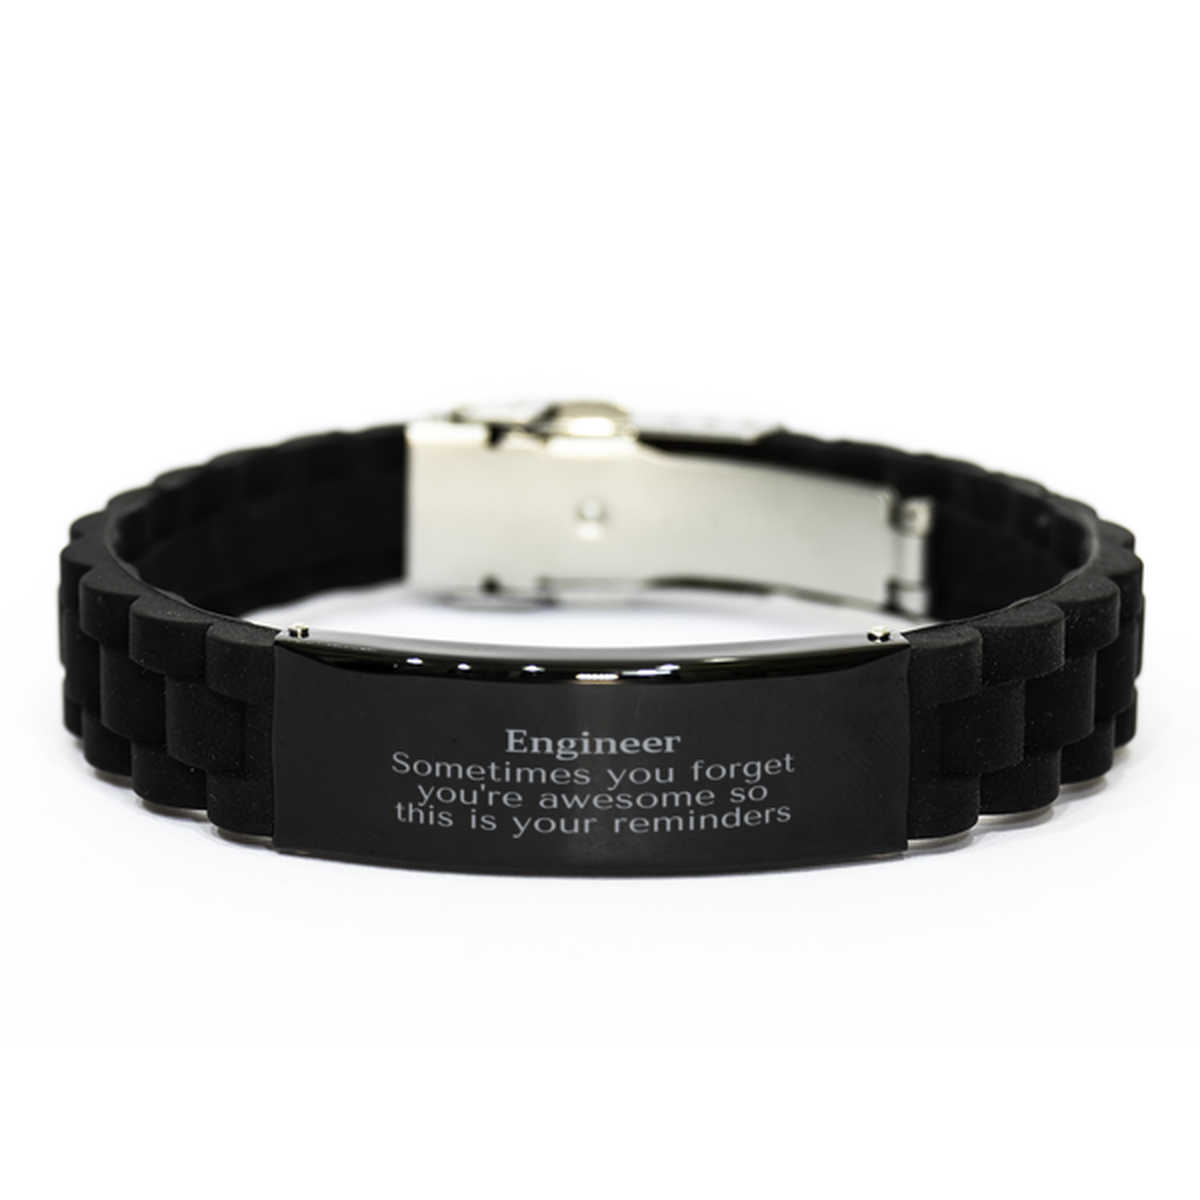 Sentimental Engineer Black Glidelock Clasp Bracelet, Engineer Sometimes you forget you're awesome so this is your reminders, Graduation Christmas Birthday Gifts for Engineer, Men, Women, Coworkers